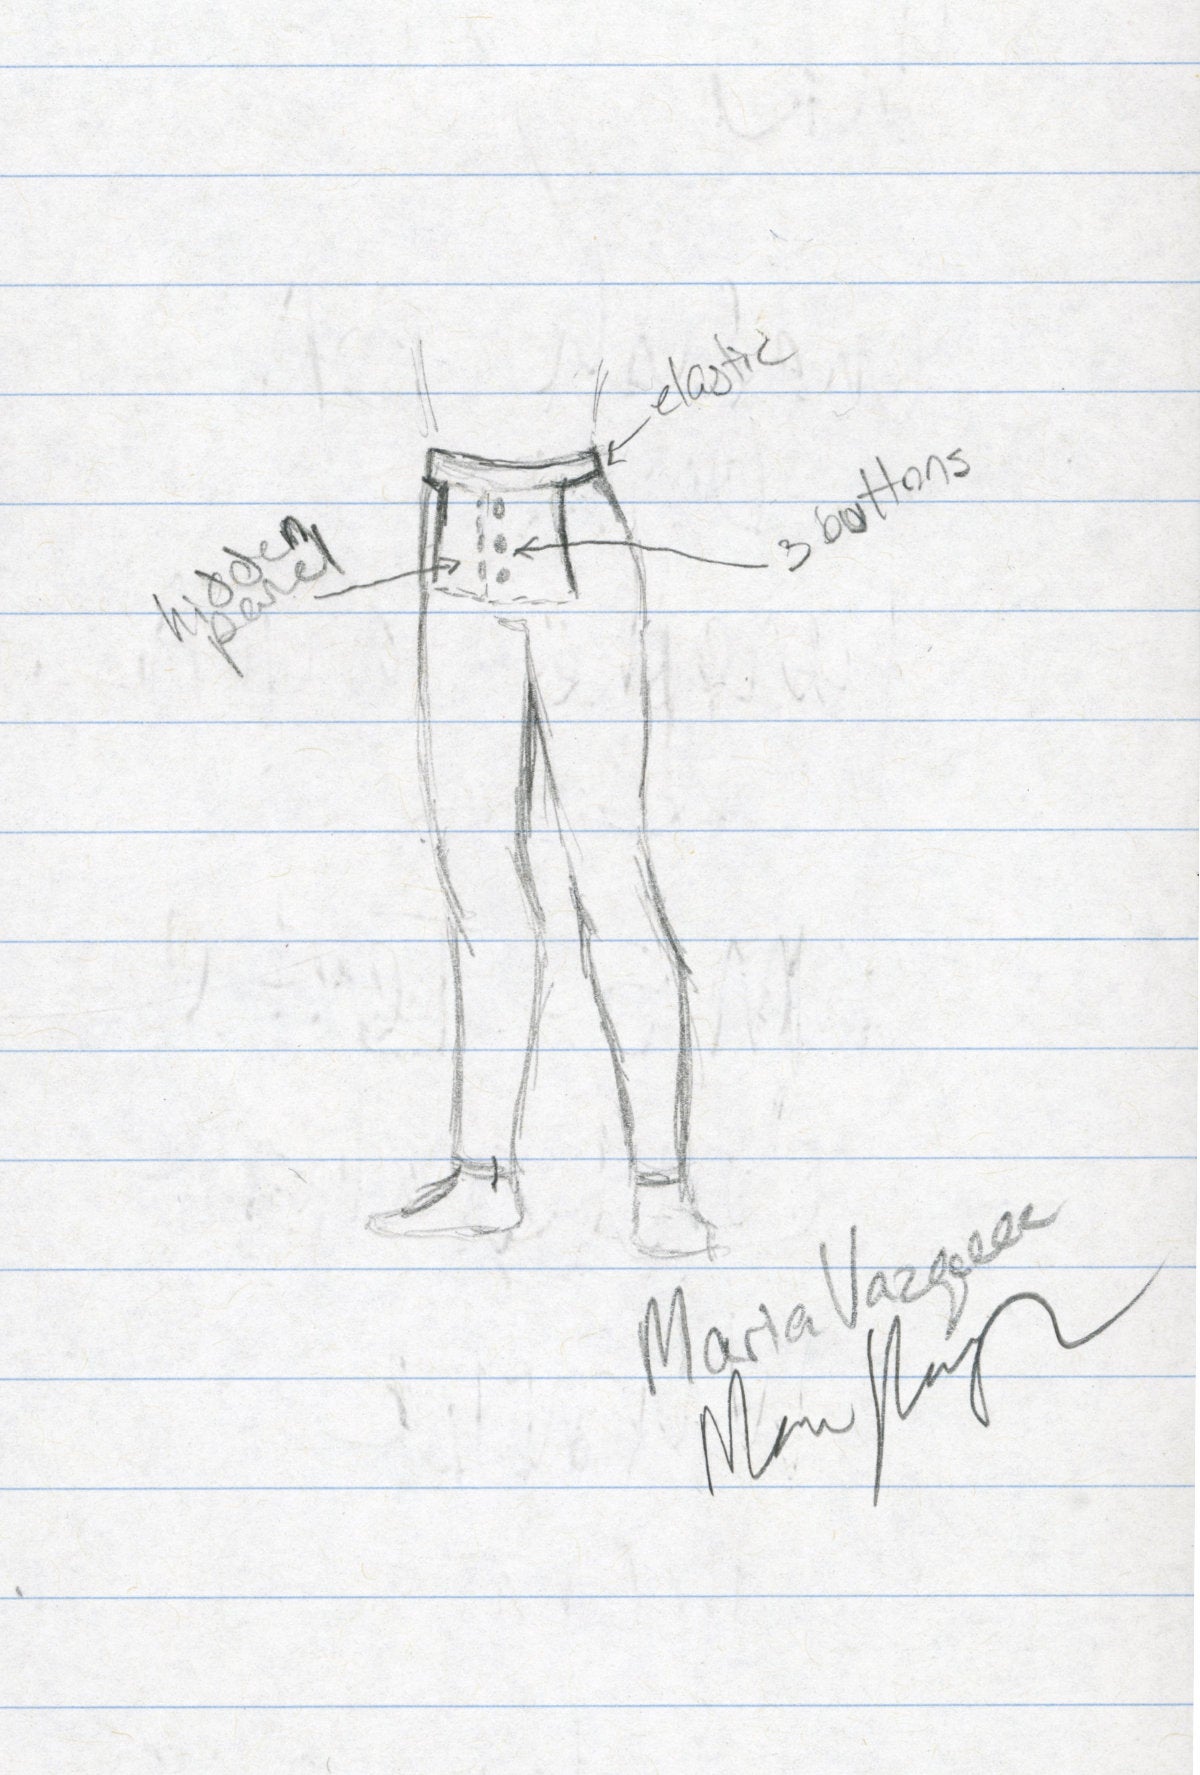 A design sketch of leggings with a skirt overlay, by Maria Vasquez